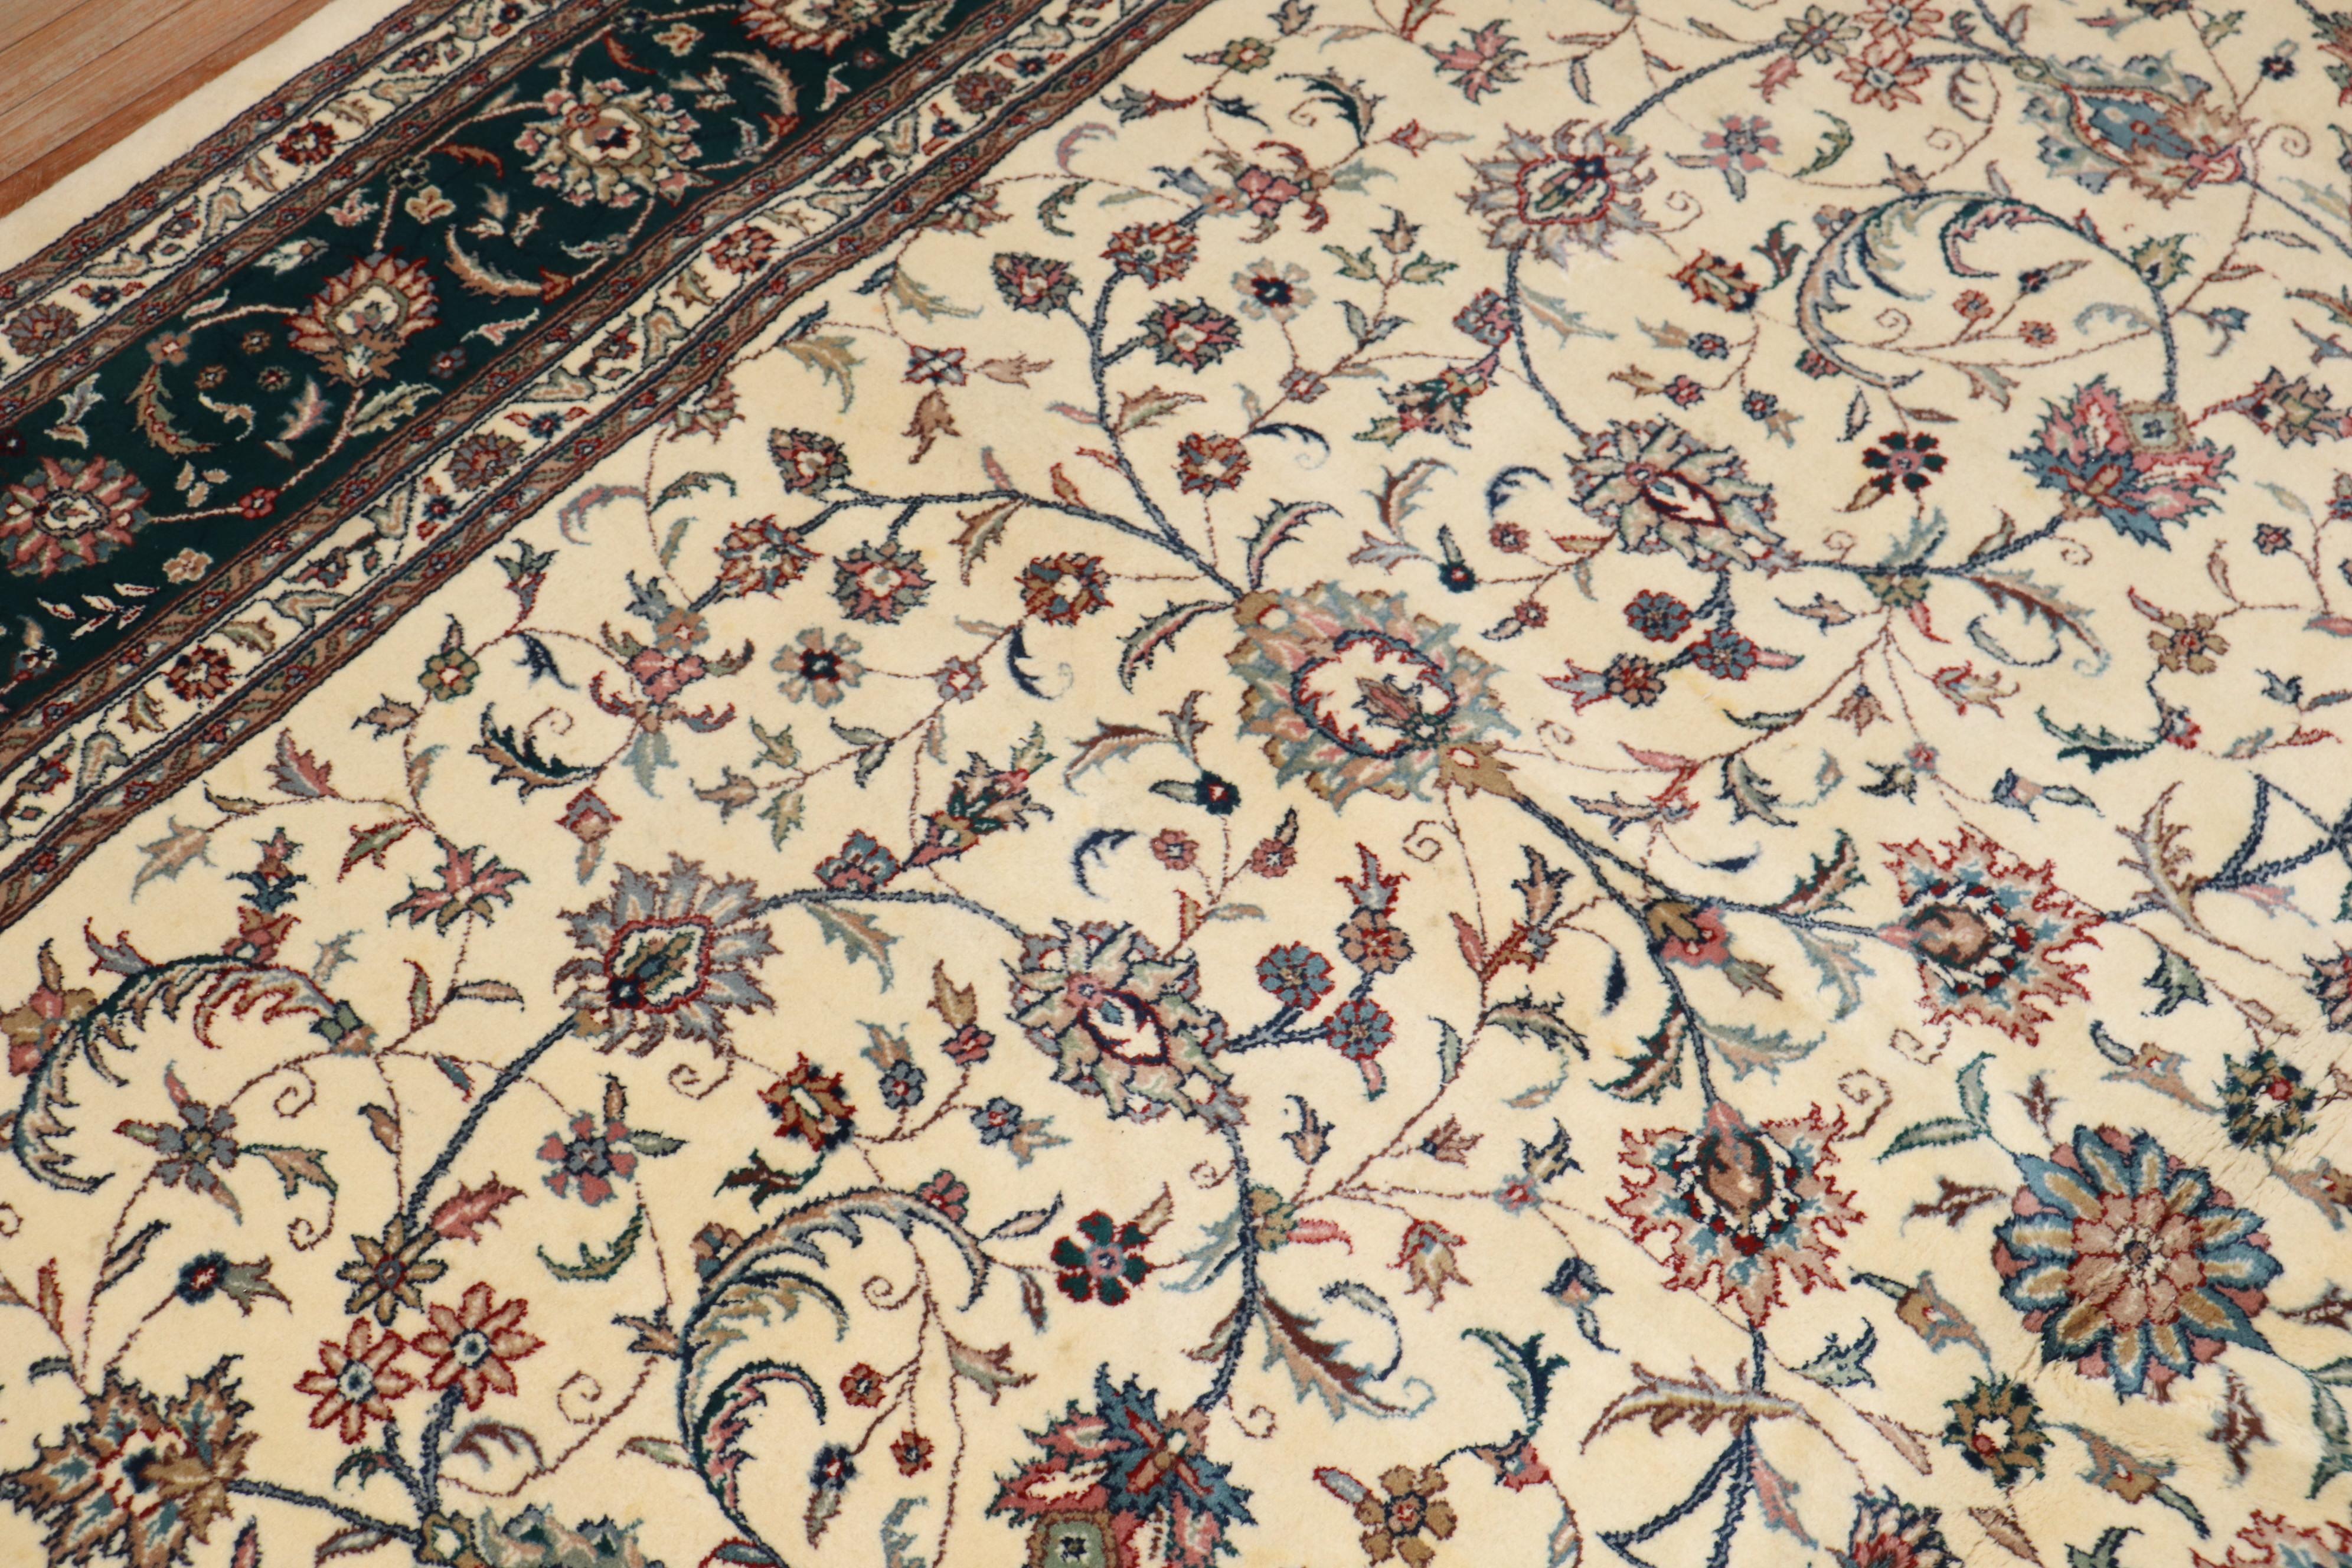 Room size Indian rug with an all over floral design on an ivory ground. Border in deep green

Mesures: 10' x 13'3''